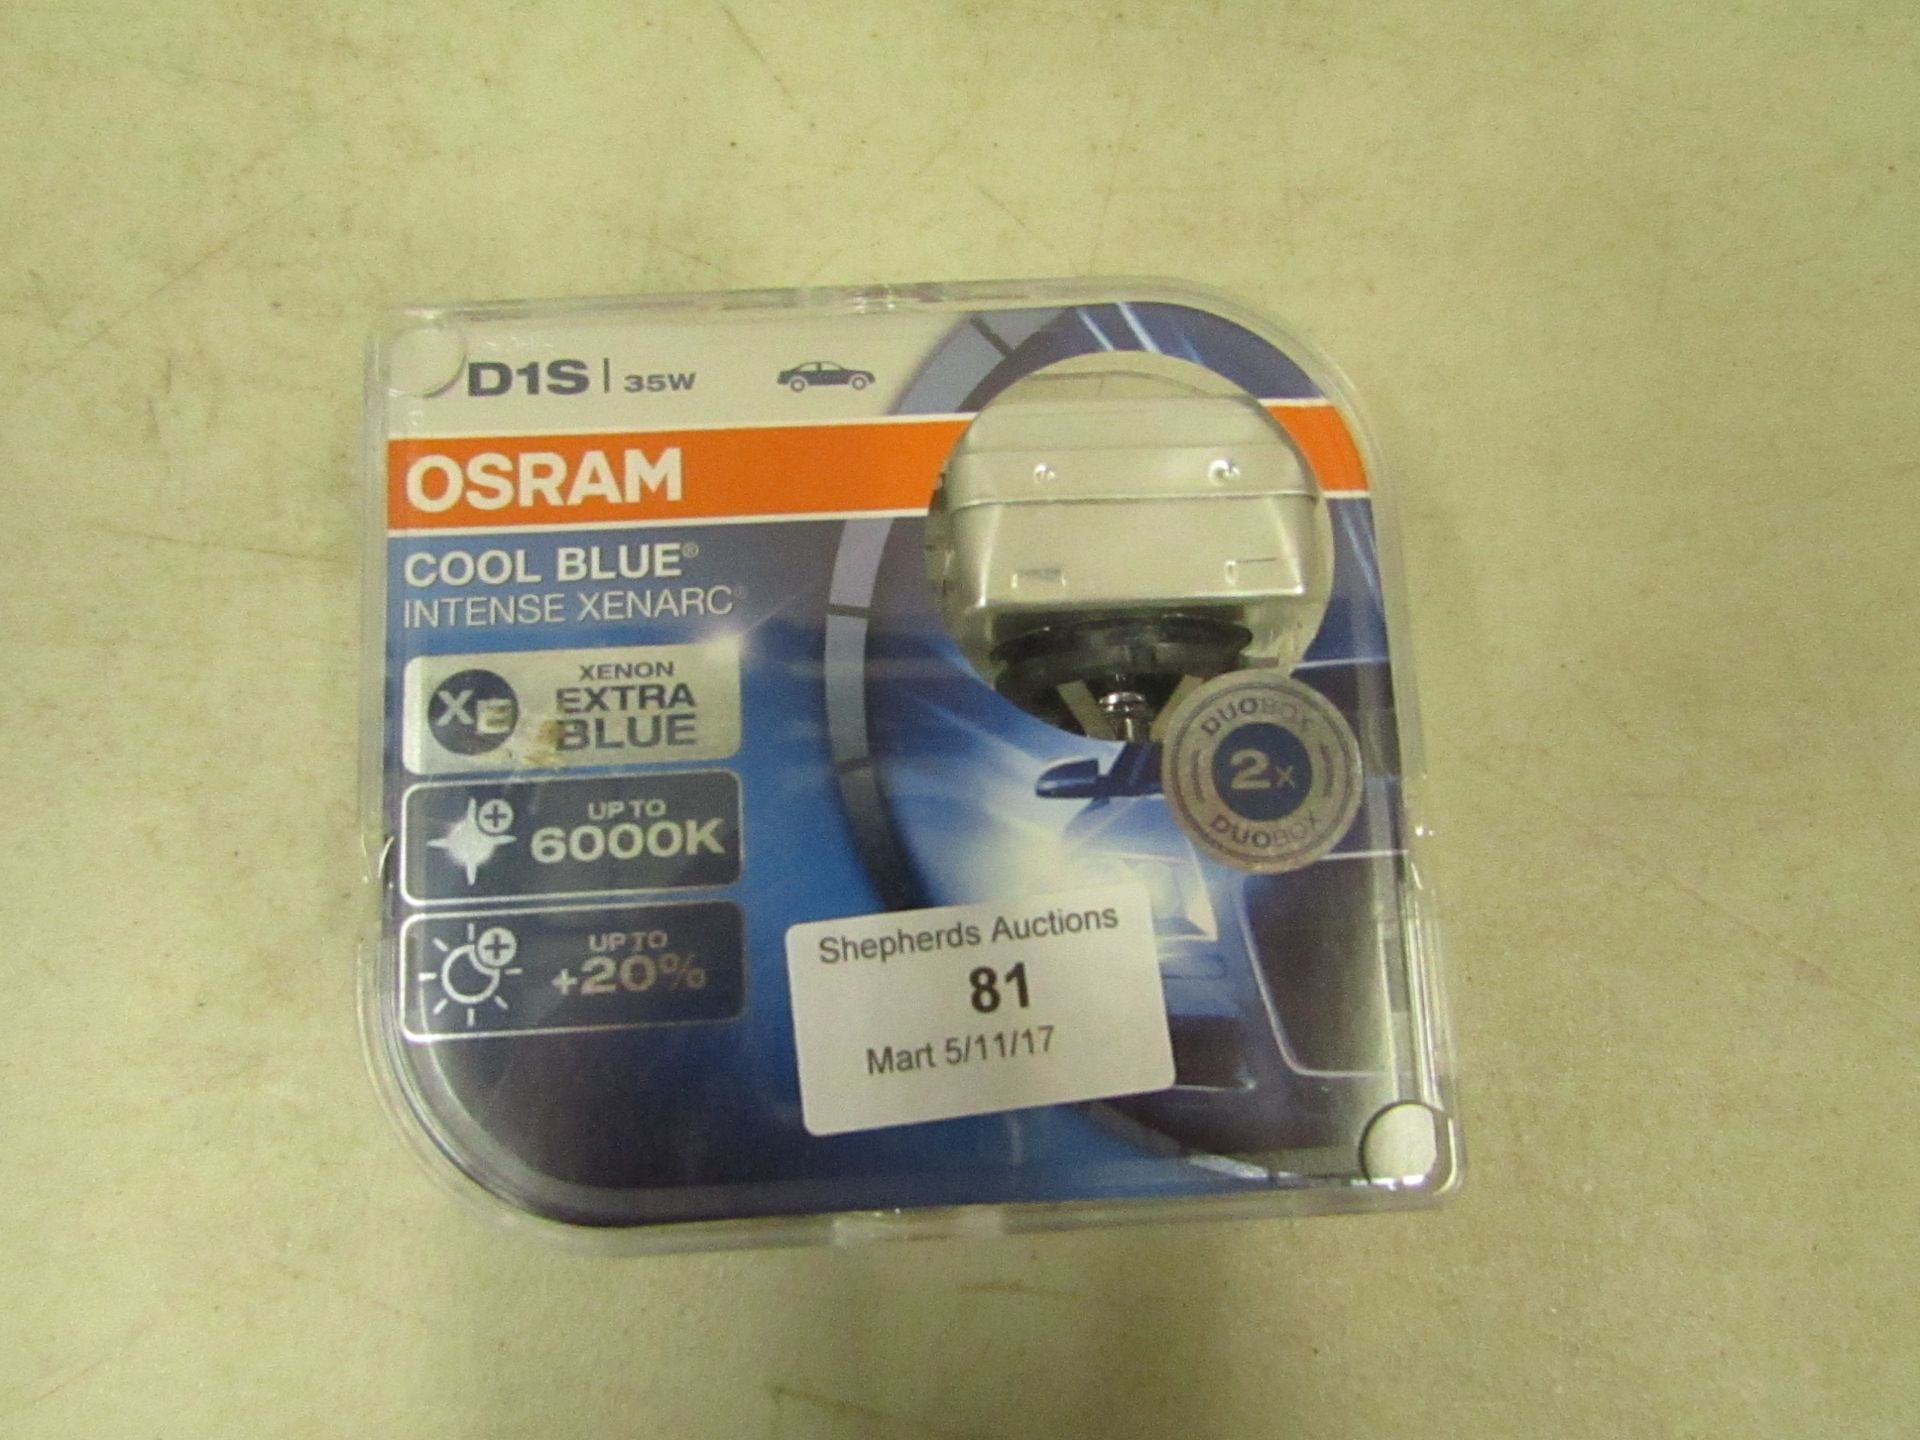 osram cool blue intense xenarc, new and packaged.